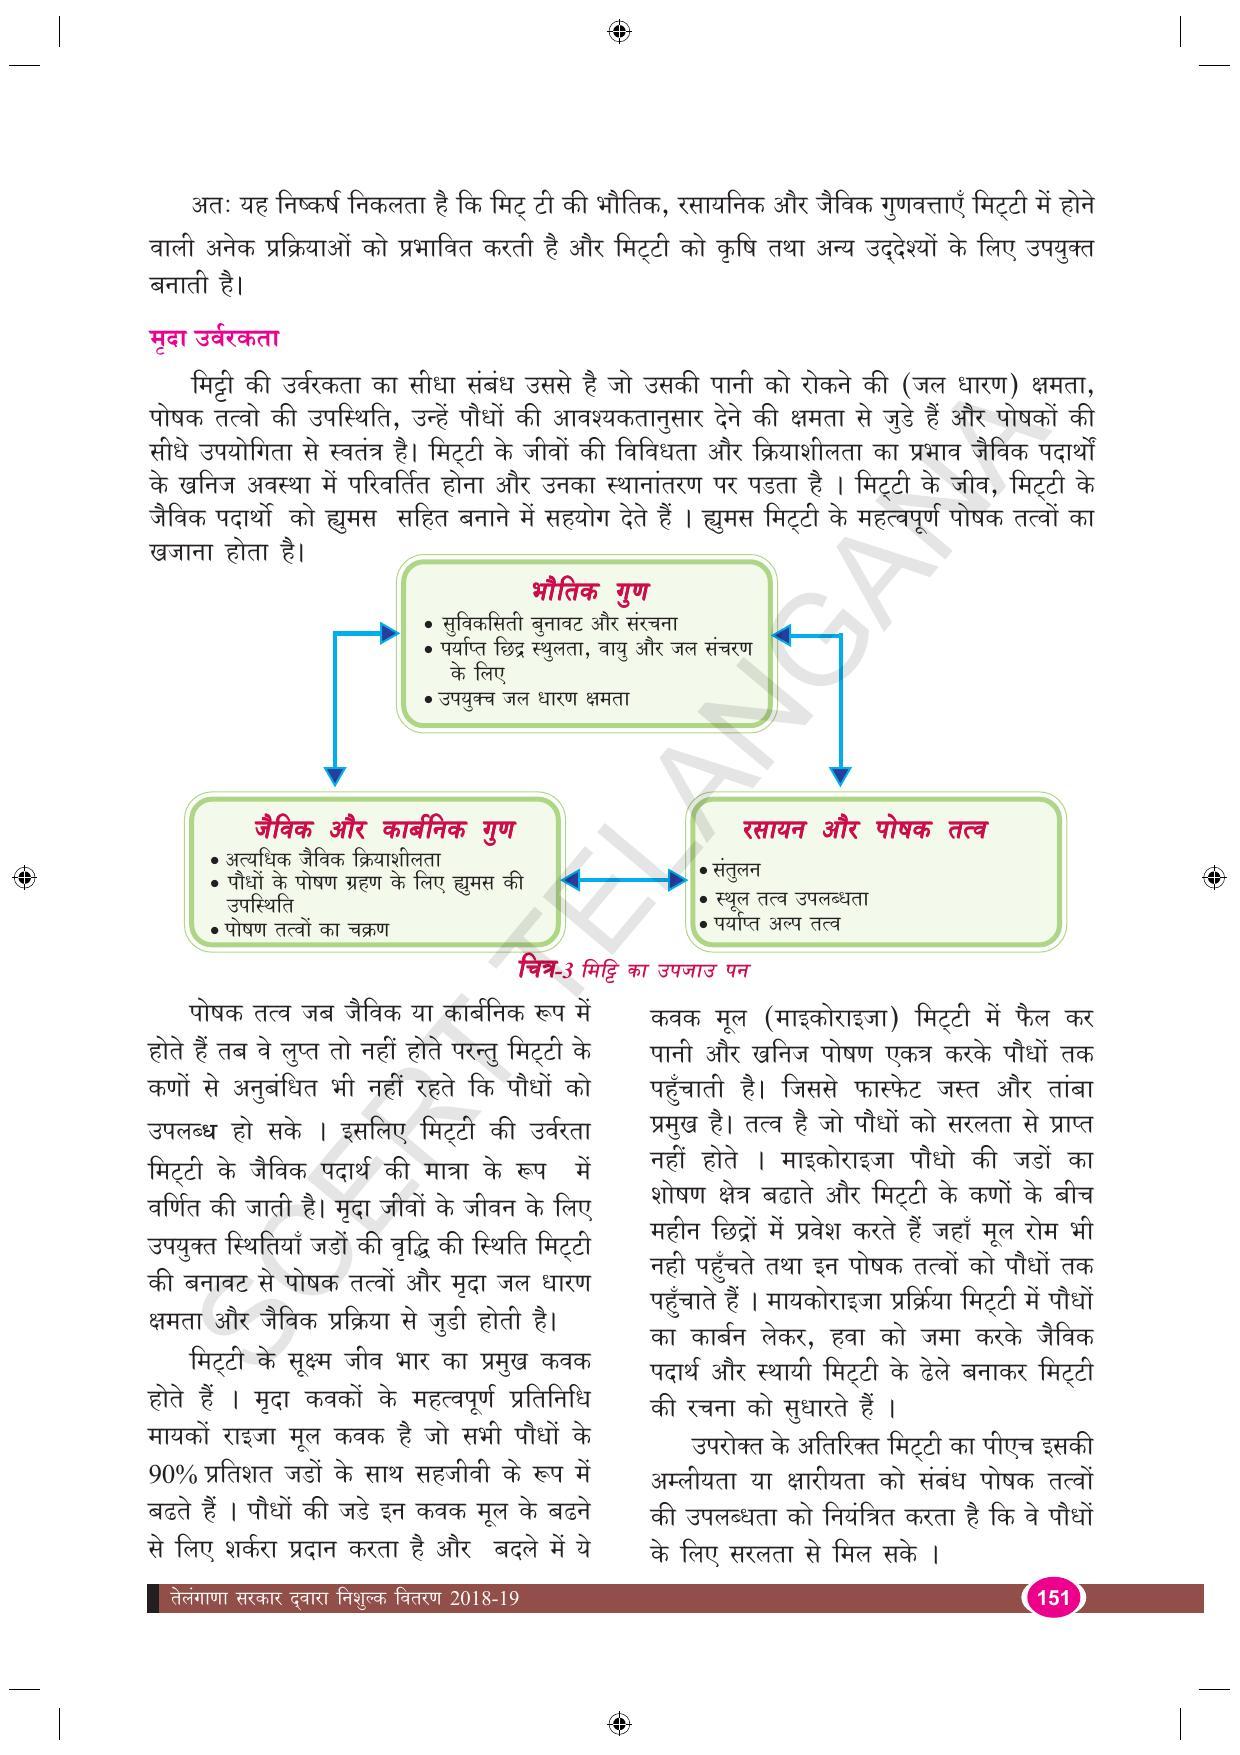 TS SCERT Class 9 Biological Science (Hindi Medium) Text Book - Page 163